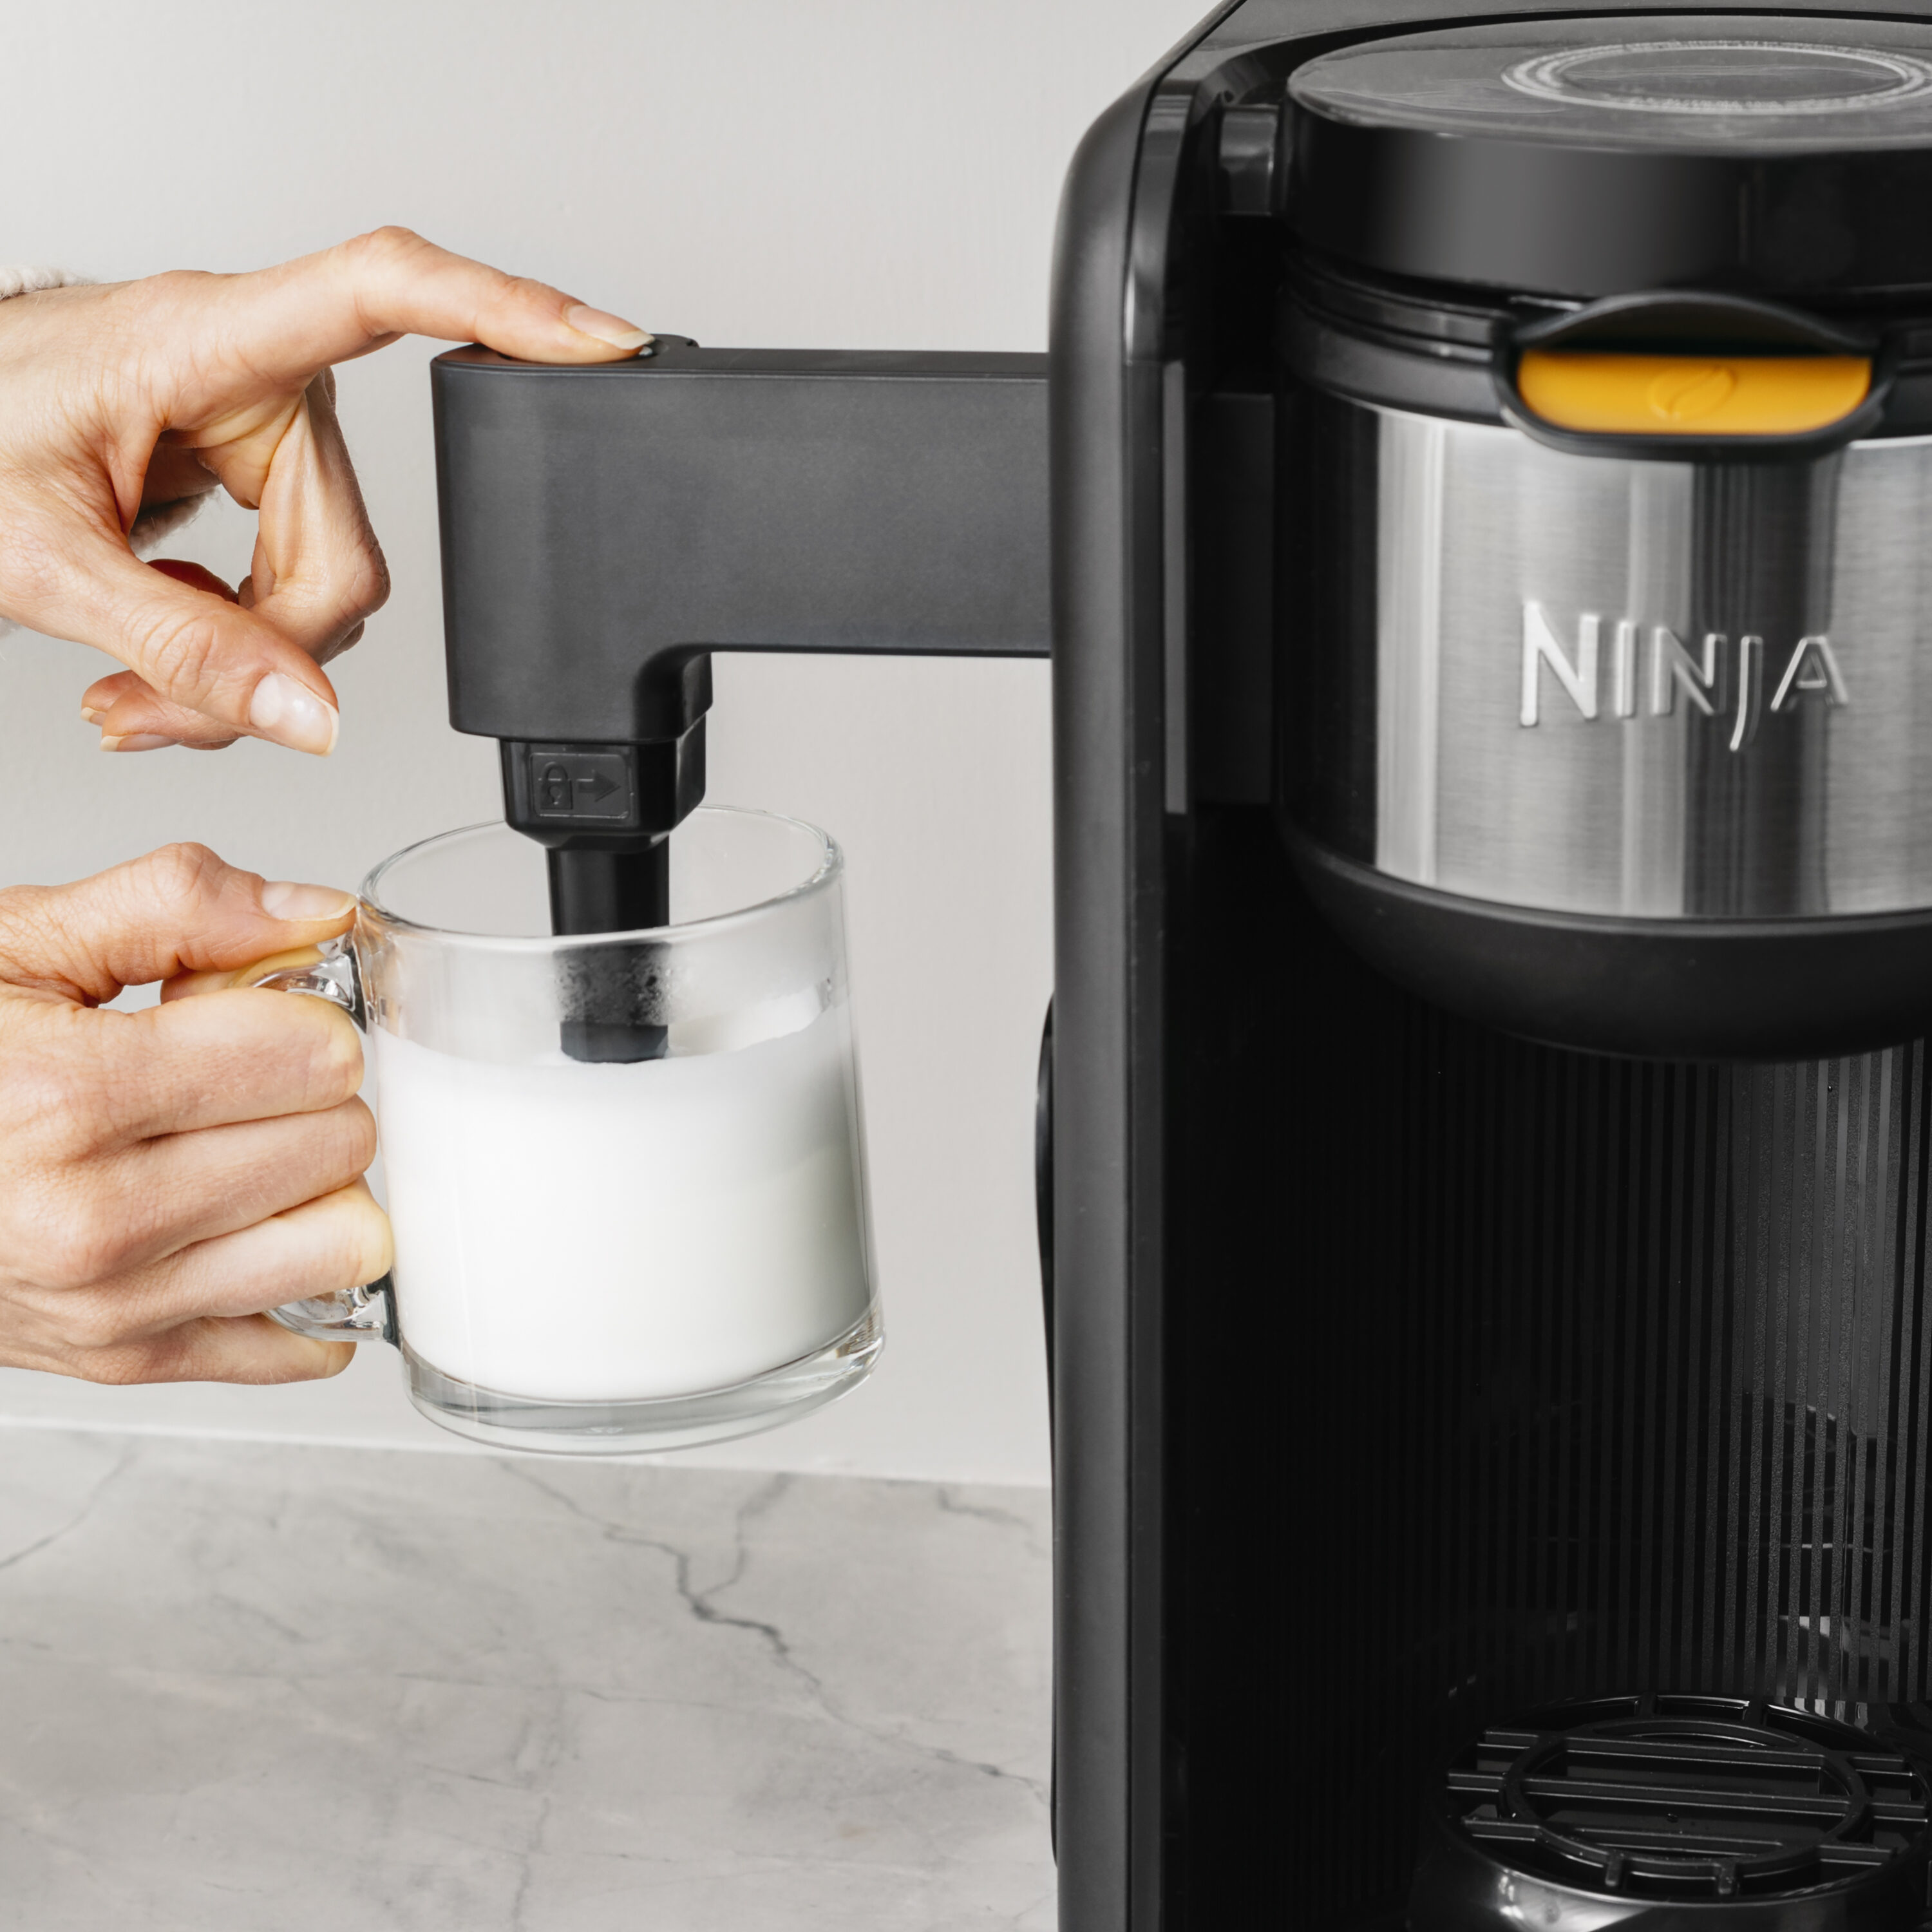 Ninja Hot and Cold Brewed System with Frother - 20115331